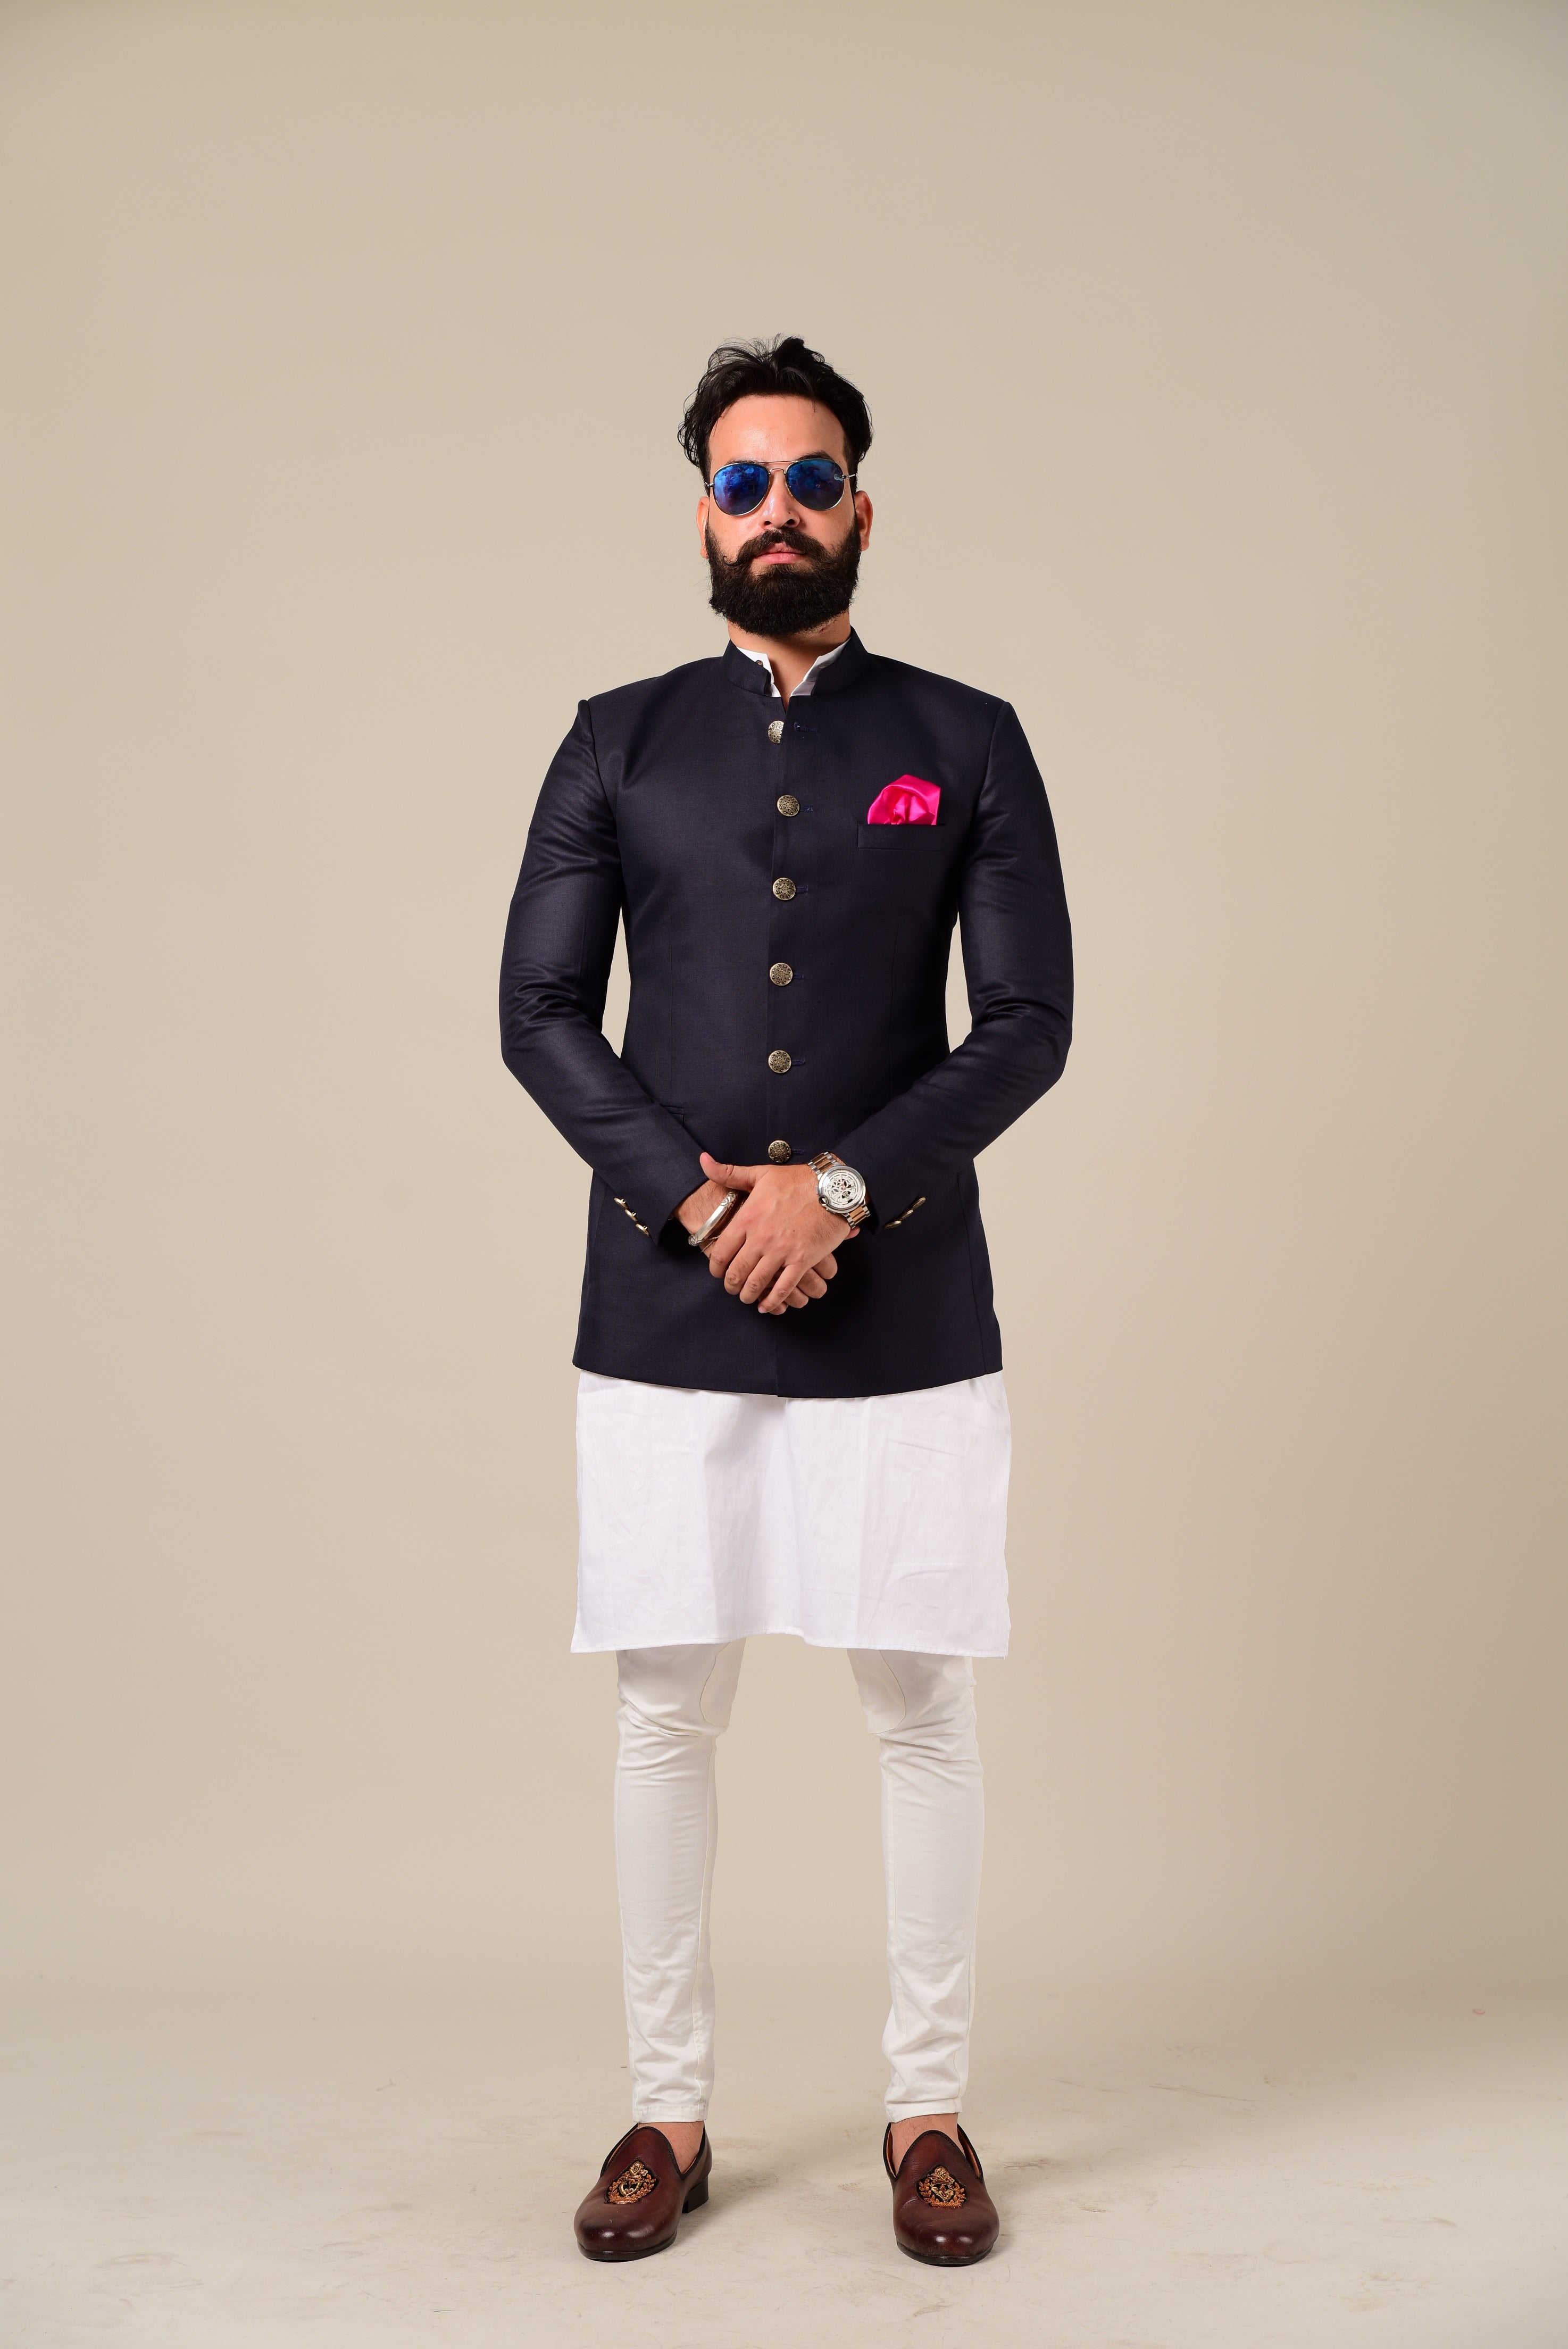 Hand-crafted Navy Blue Jodhpuri Band gala with Kurta Pajama Set, Available in Father Son Combo | Contemporarily styled ethnic